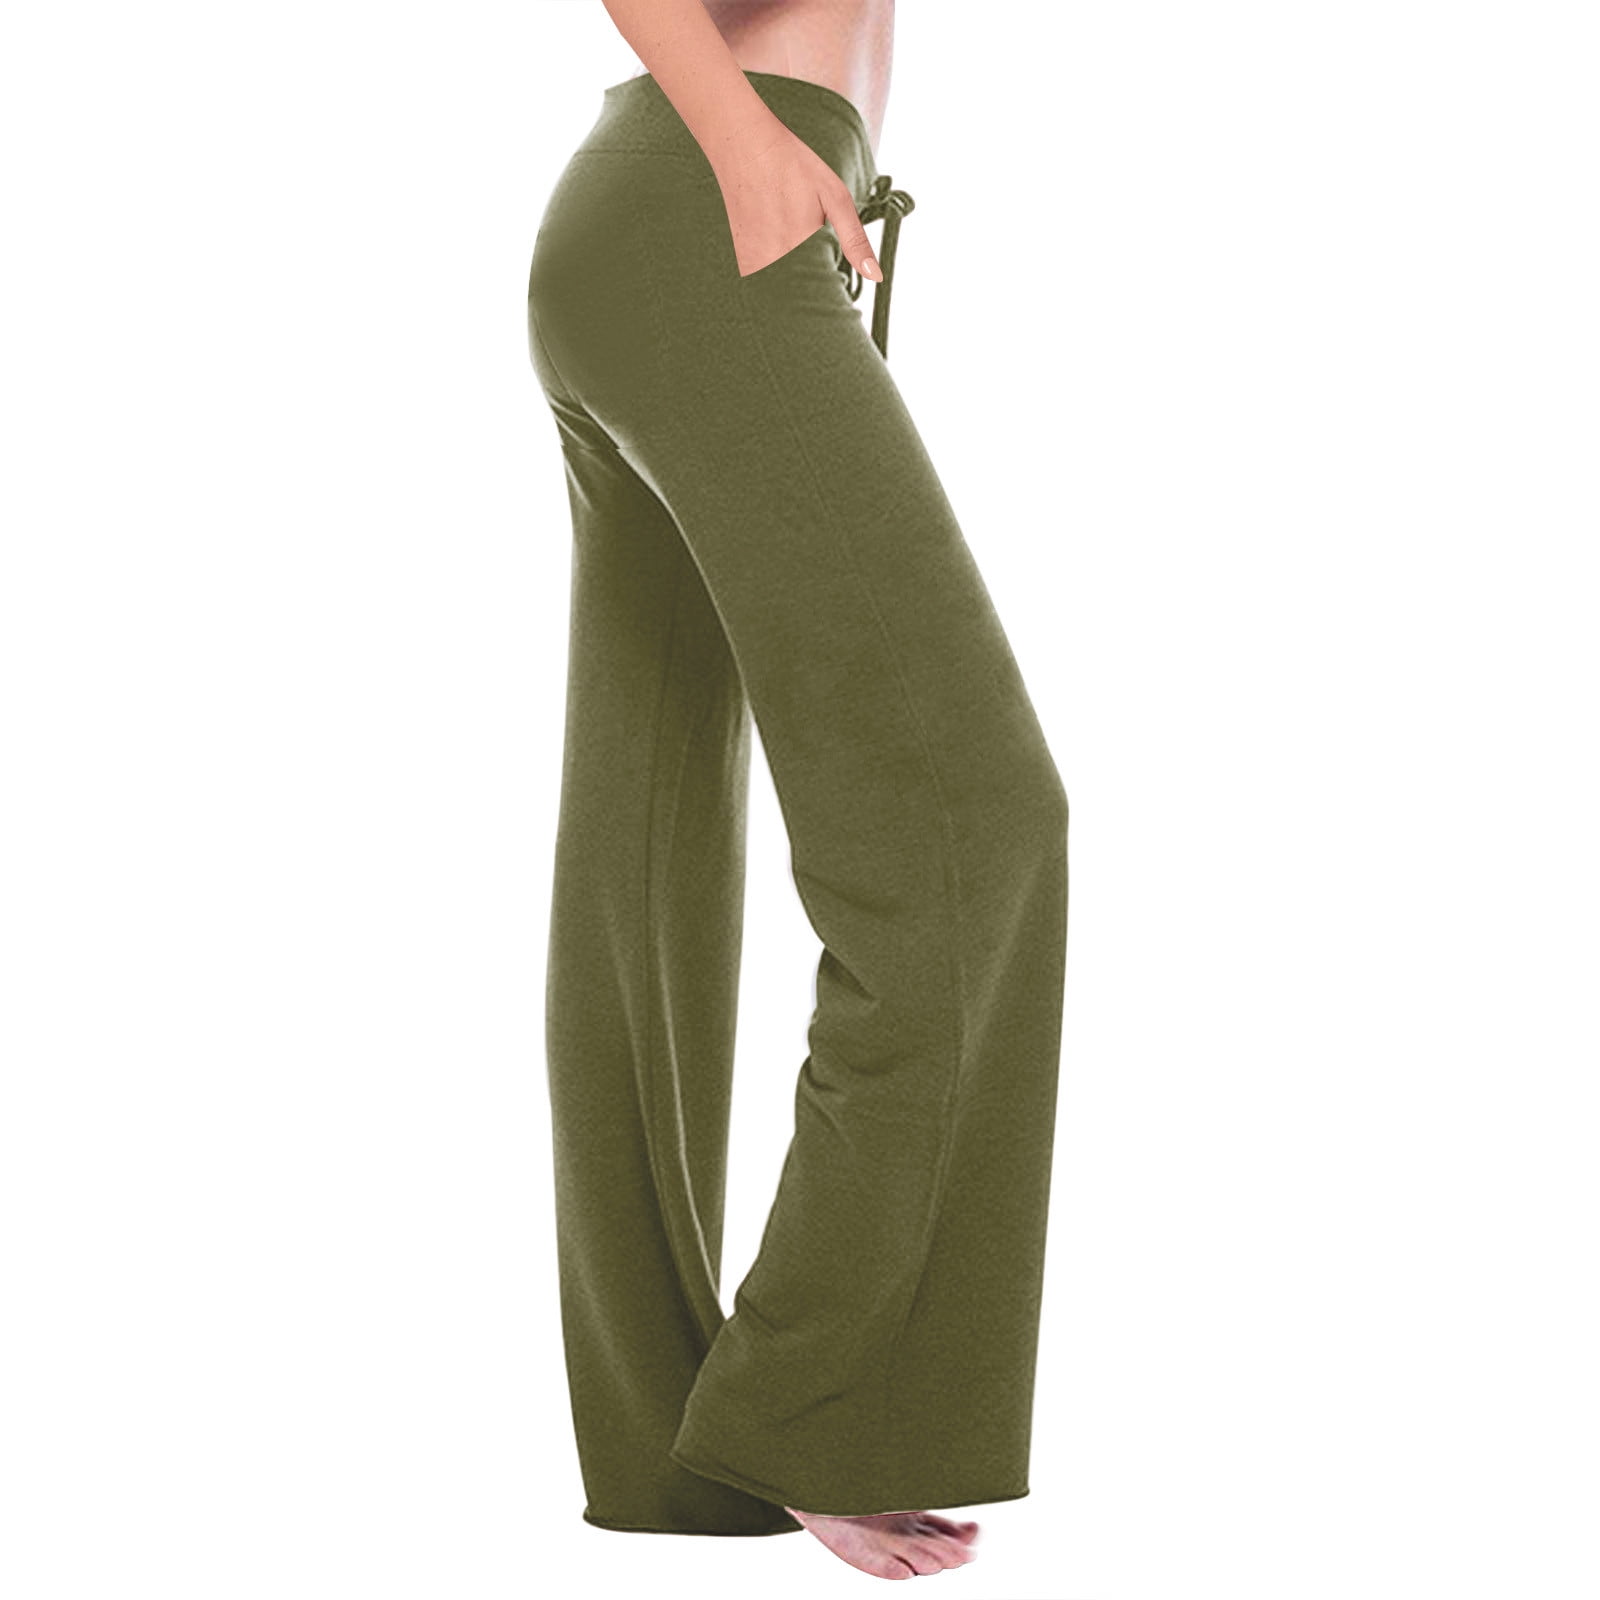 Lindreshi Cargo Pants for Women with Pockets Women Workout out